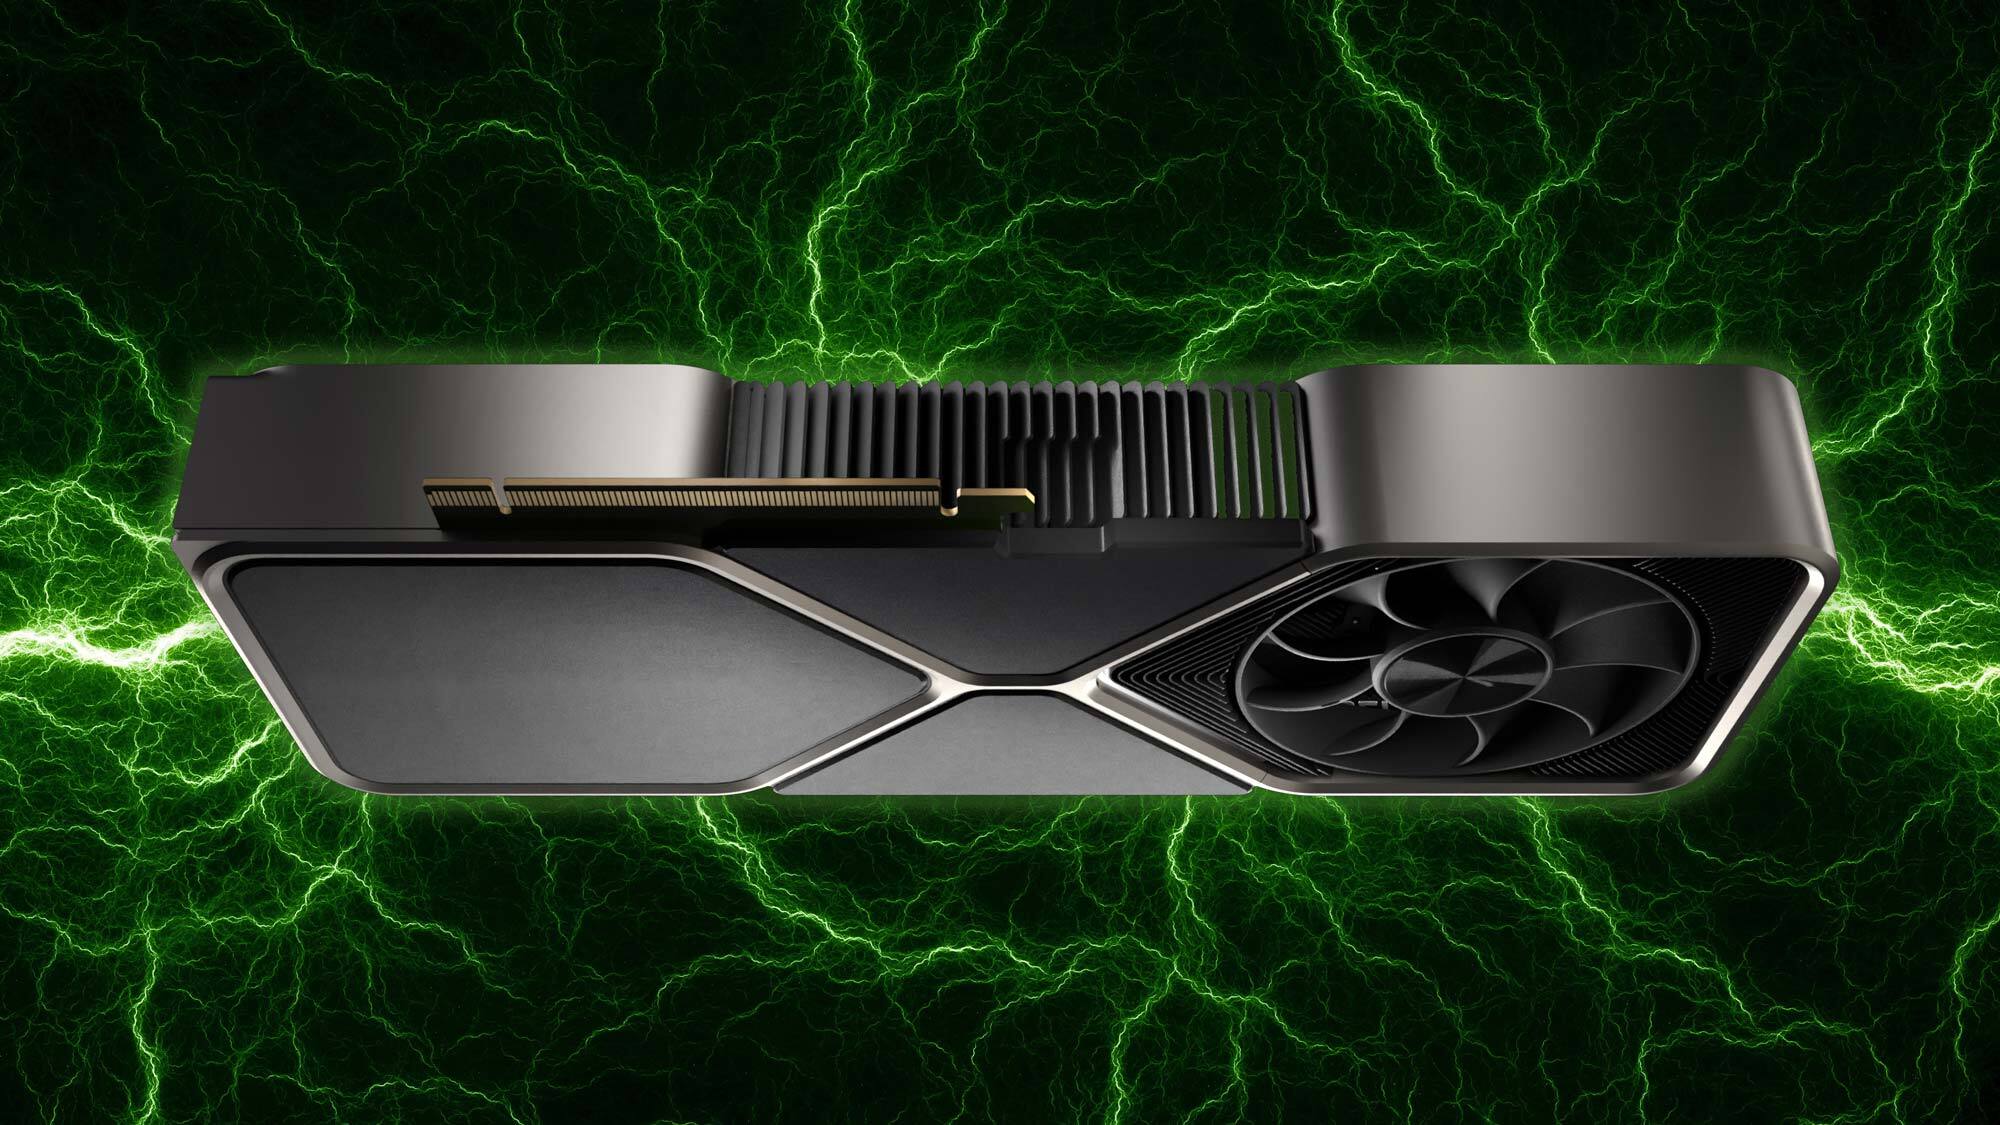 Nvidia GeForce RTX 3080 Ti release date, price, specs, performance and more